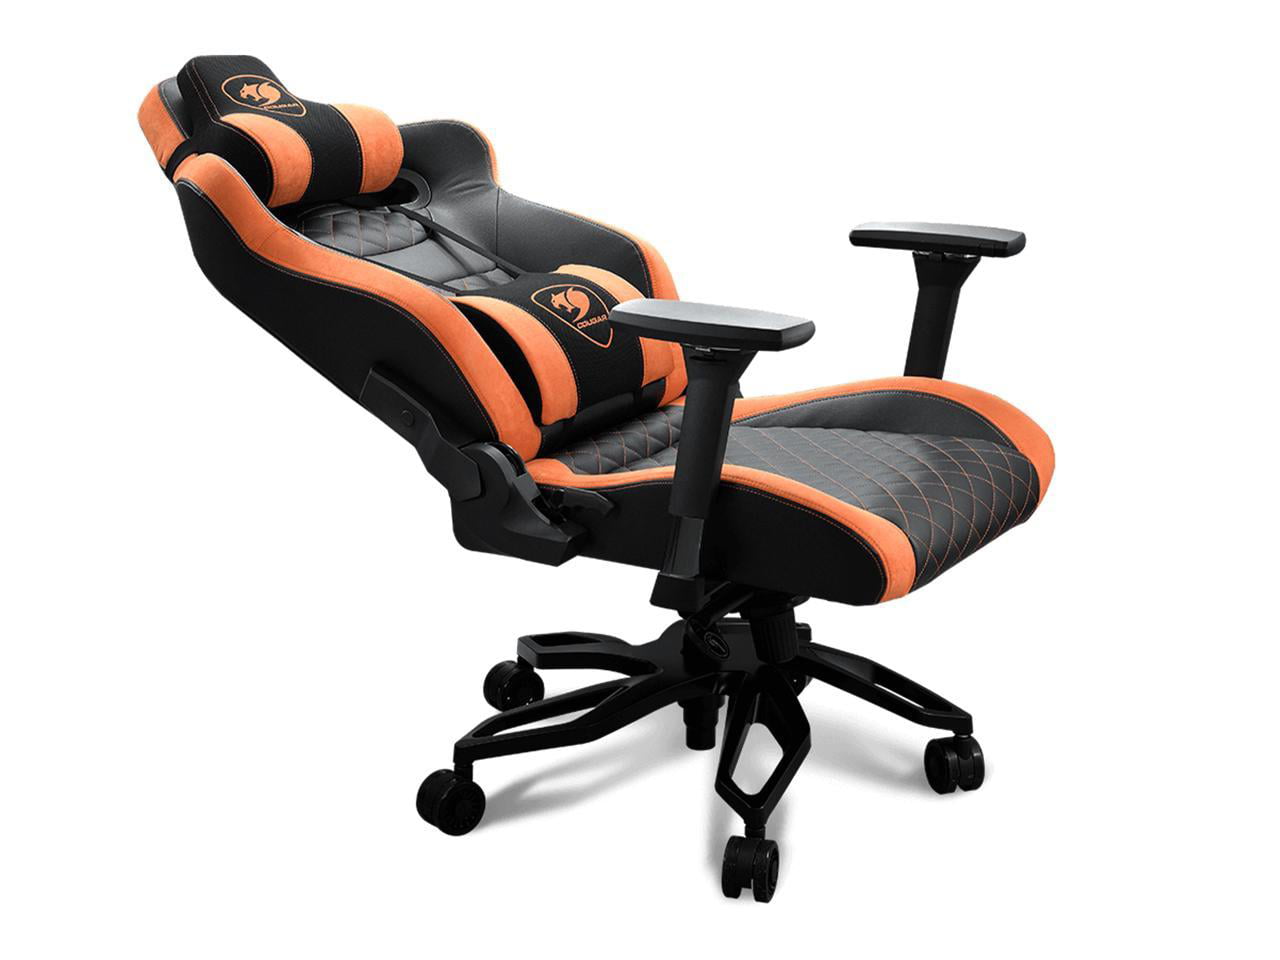 The Perfect Gaming Chair For The Big Boys!!! - Cougar Armor Titan